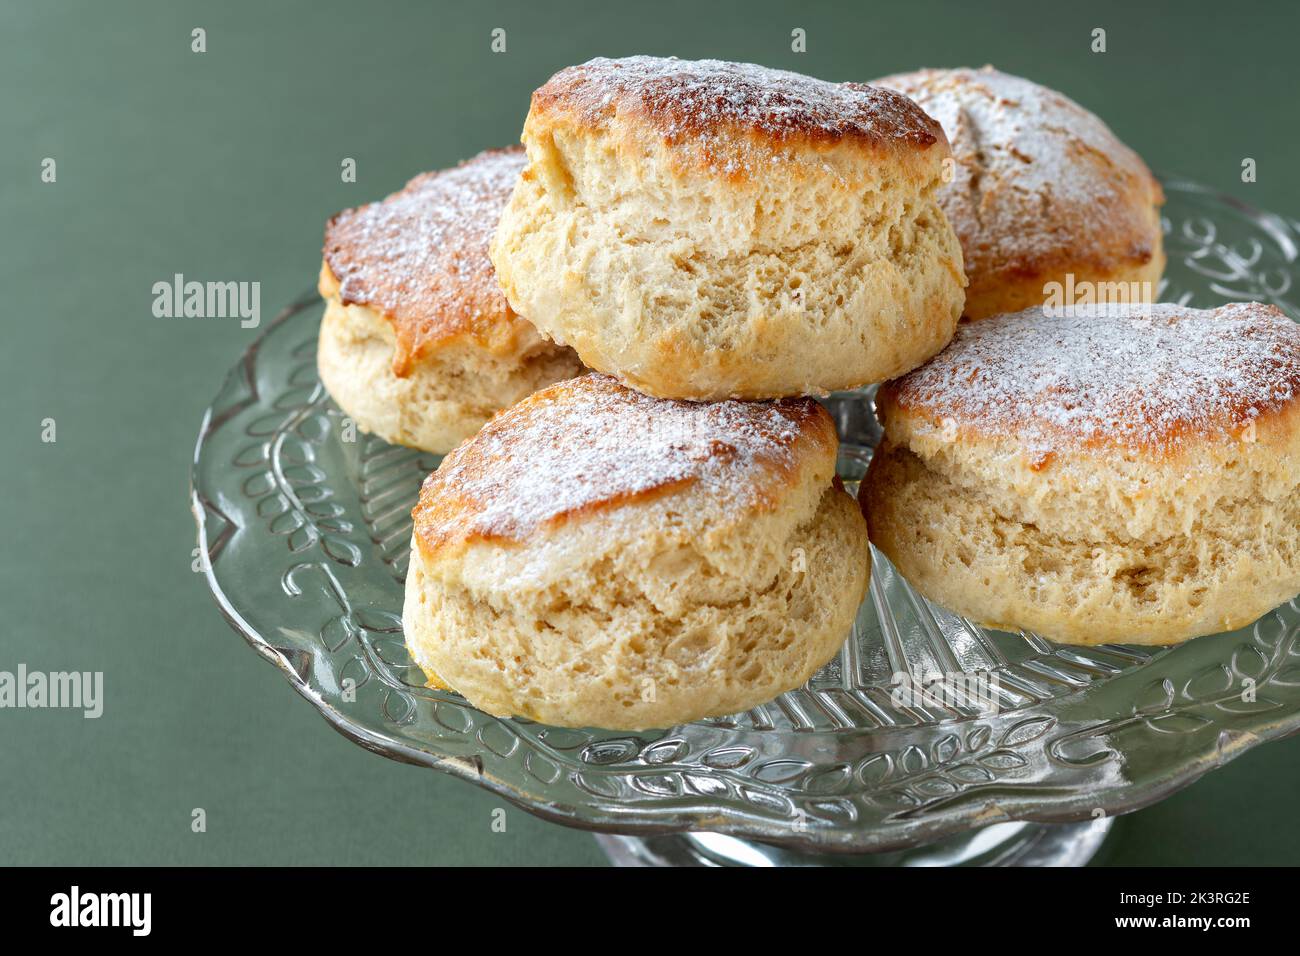 Freshly made traditional plain scones are shown on a glass cake stand. The cakes are lightly dusted with icing sugar and shown close up Stock Photo